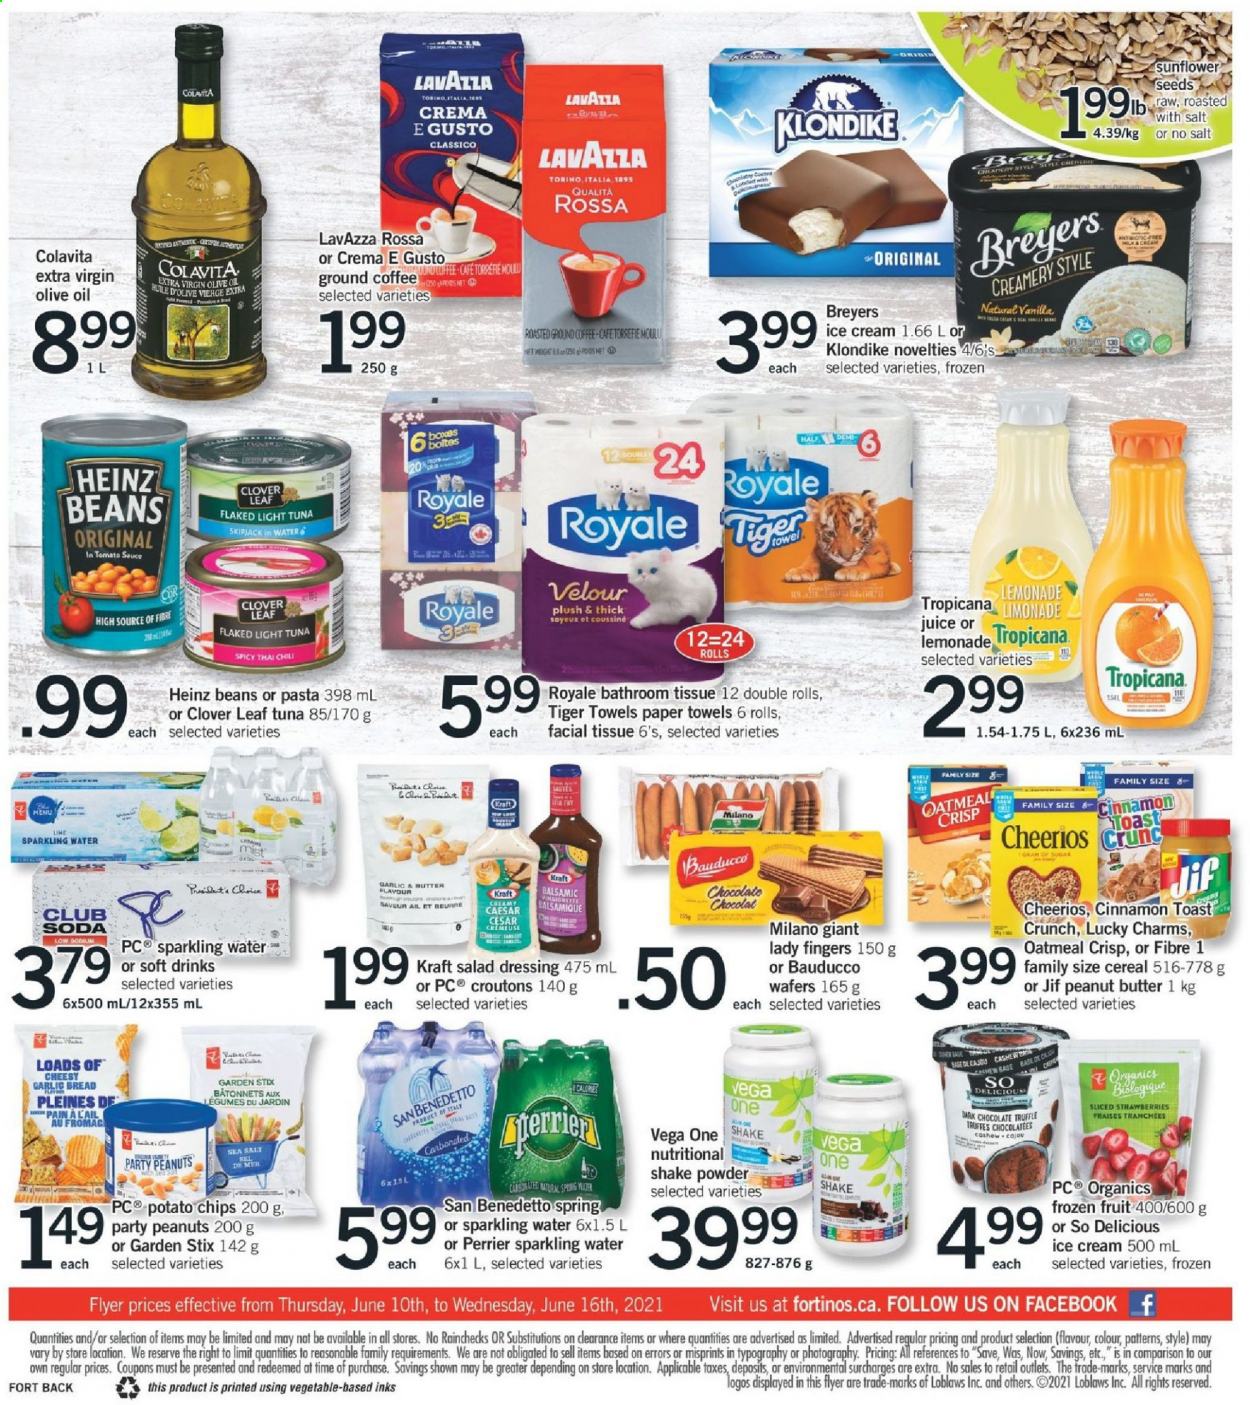 thumbnail - Fortinos Flyer - June 10, 2021 - June 16, 2021 - Sales products - bread, tuna, Kraft®, Clover, shake, ice cream, lady fingers, wafers, potato chips, croutons, oatmeal, Heinz, light tuna, cereals, Cheerios, cinnamon, salad dressing, dressing, Classico, extra virgin olive oil, olive oil, oil, peanut butter, Jif, peanuts, sunflower seeds, lemonade, juice, soft drink, Perrier, Club Soda, sparkling water, coffee, ground coffee, Lavazza, bath tissue, kitchen towels, paper towels. Page 2.